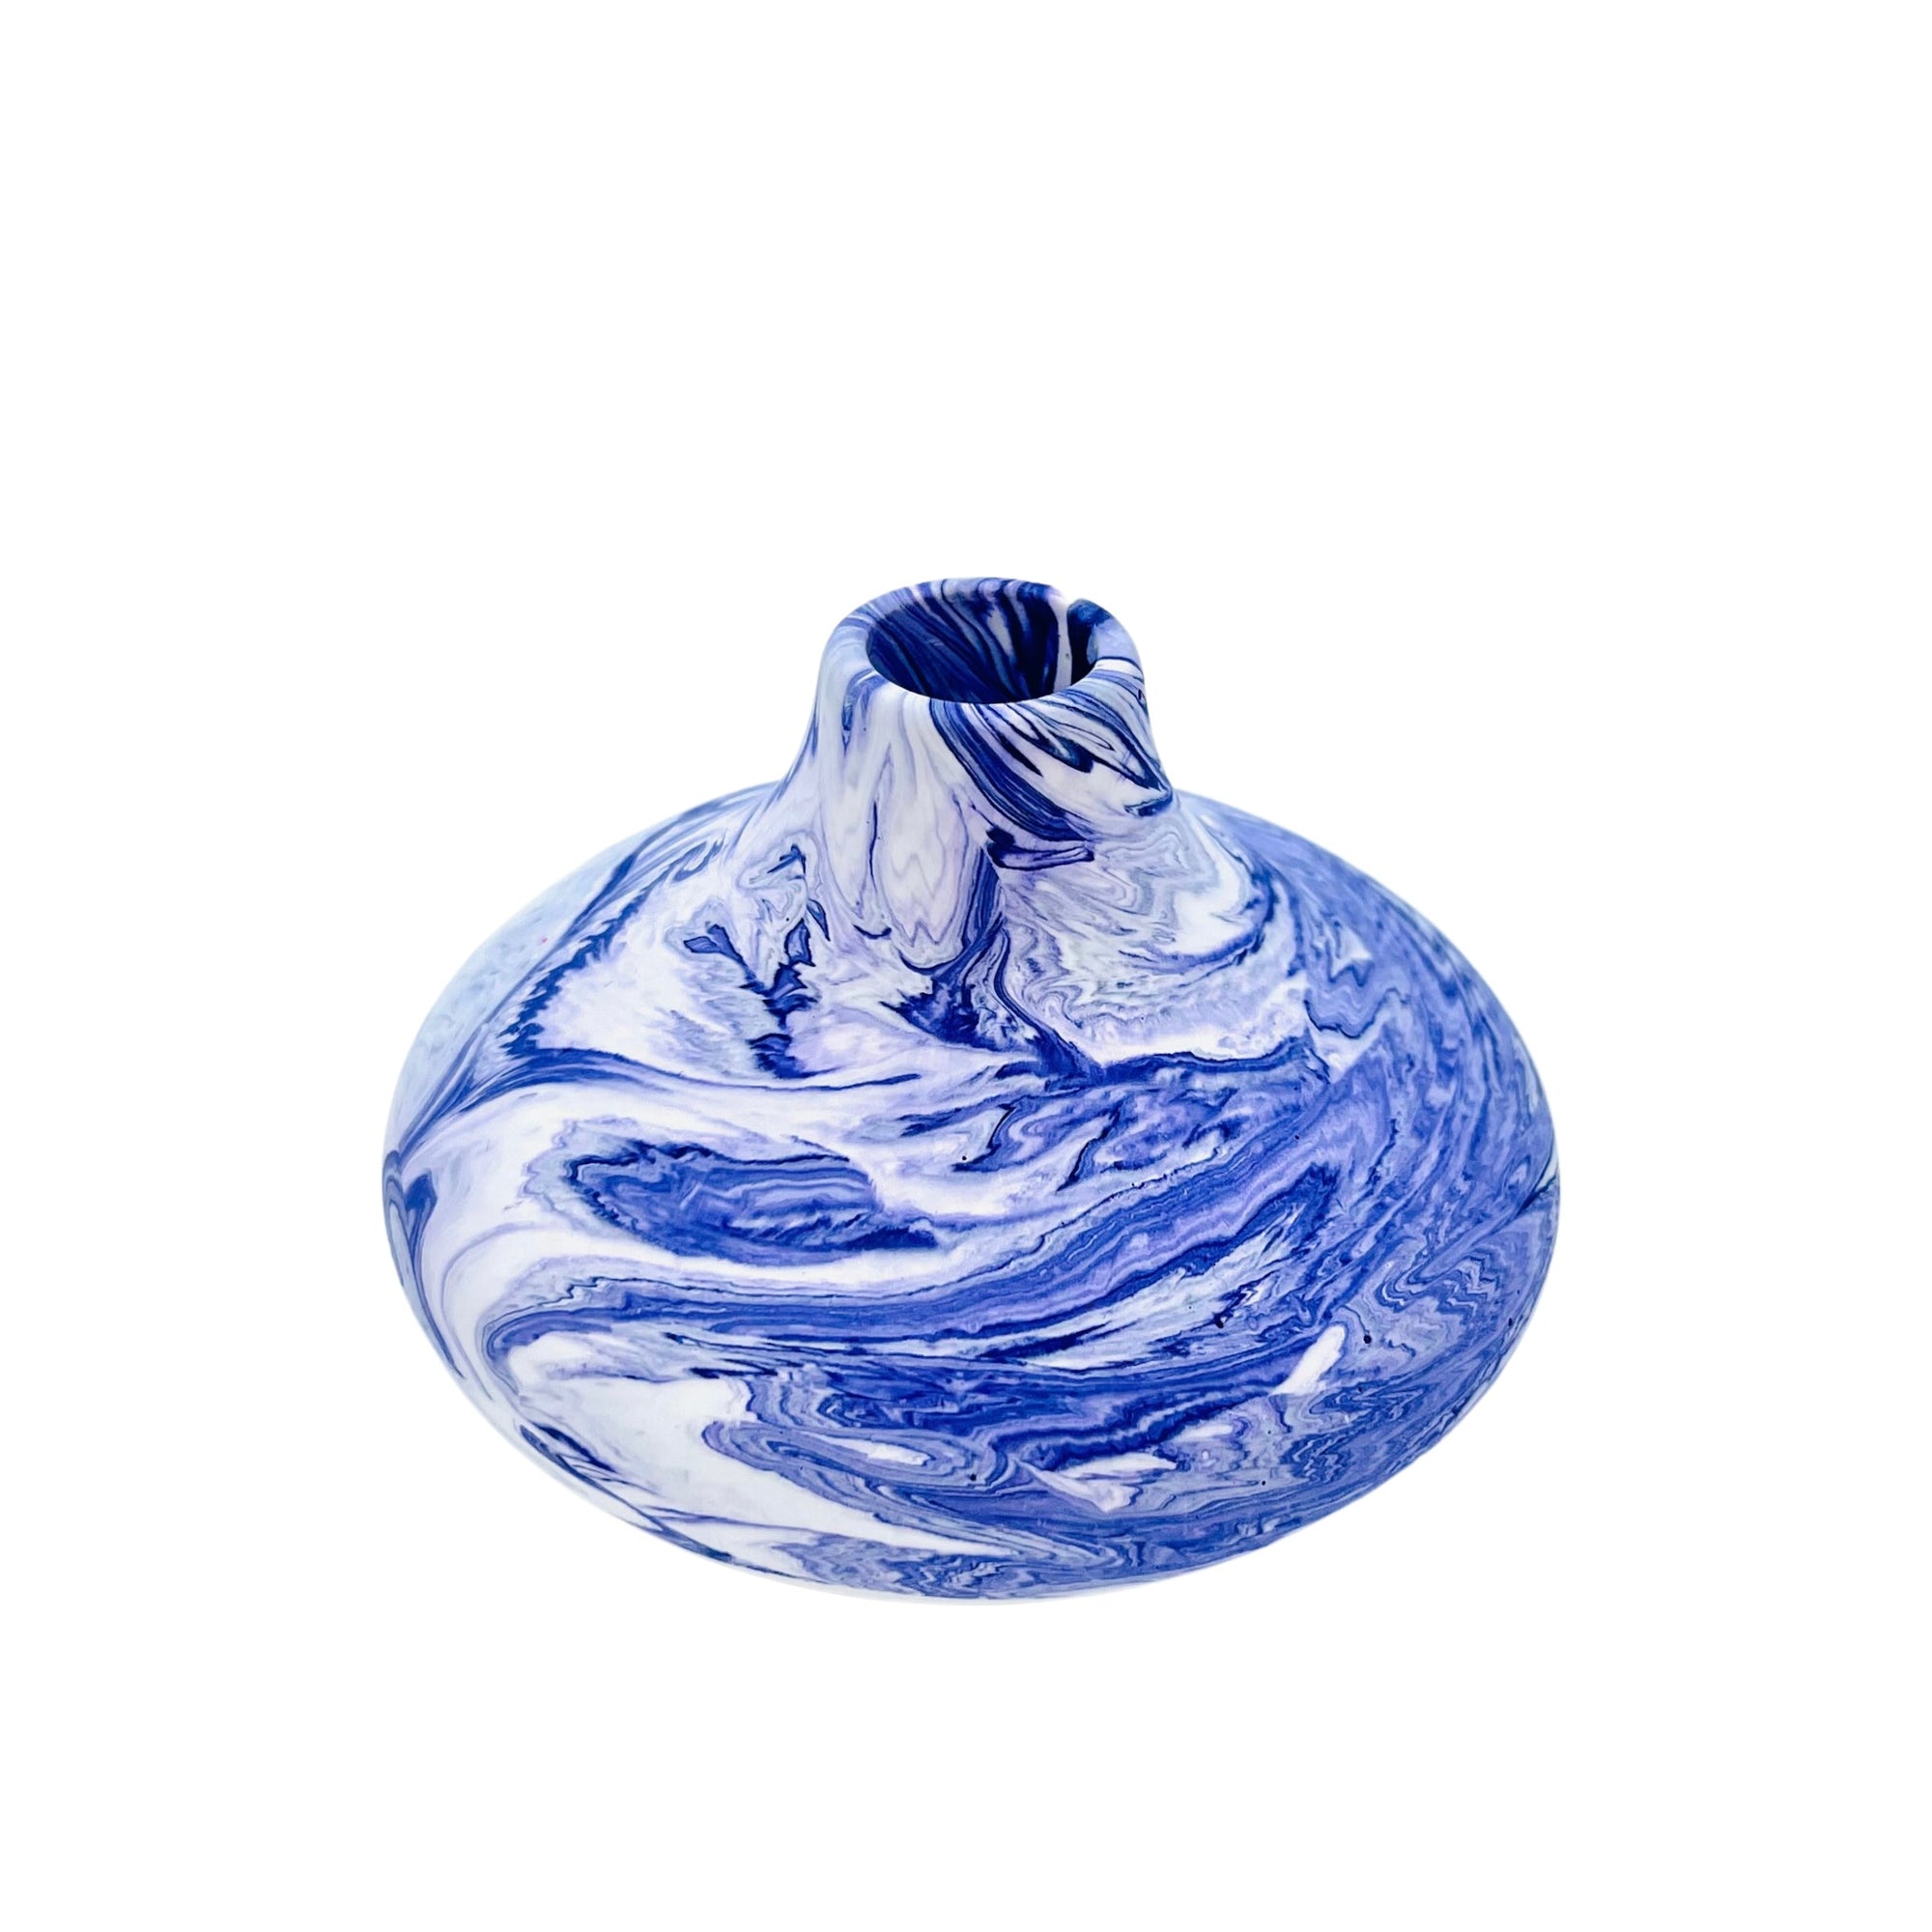 This small bulbous Jesmonite vase is marbled with purple pigment.